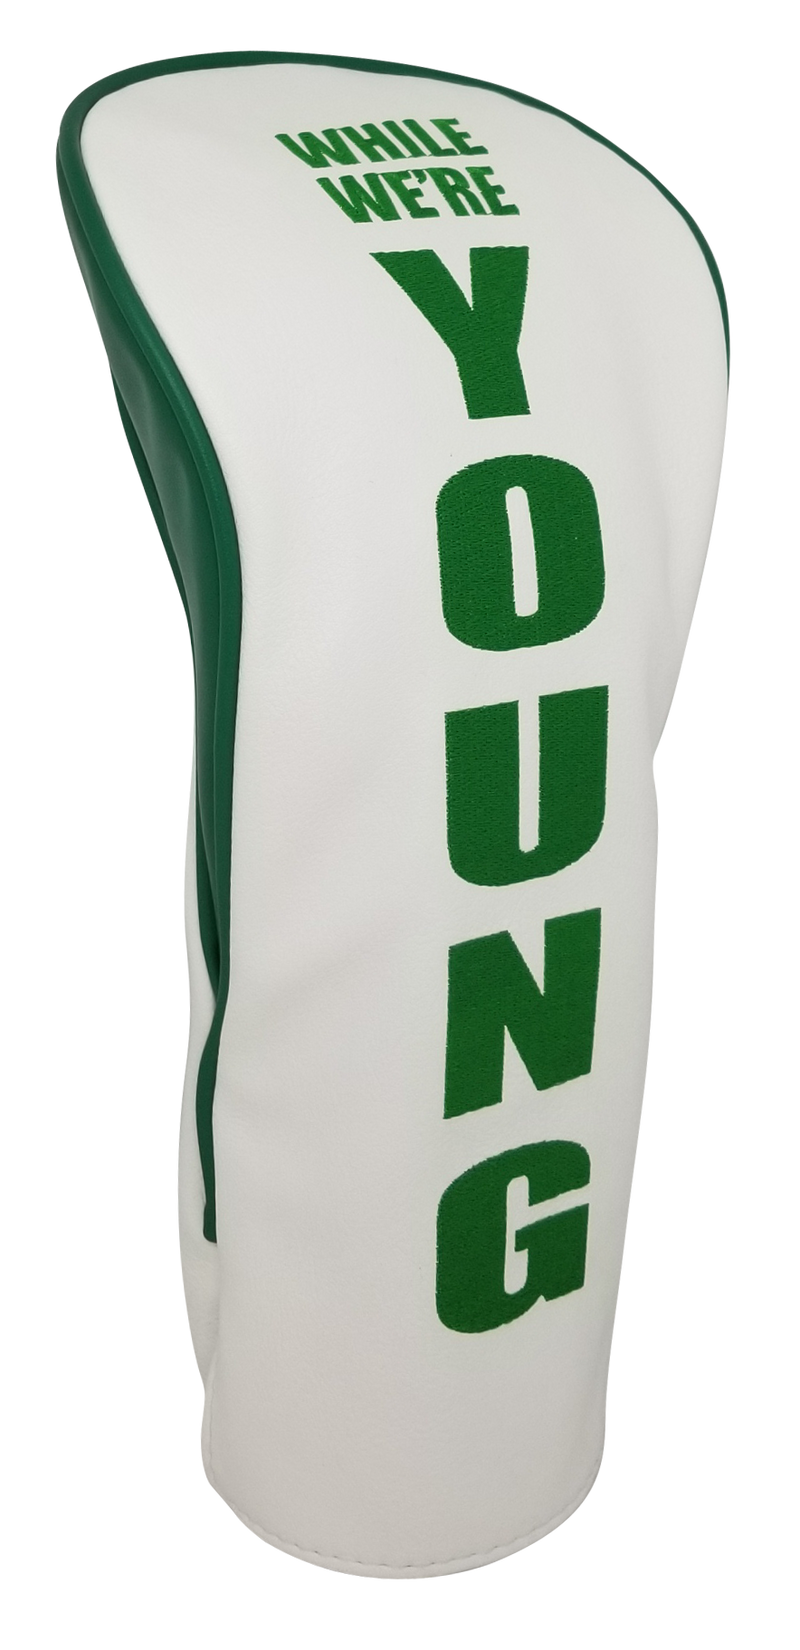 While We're Young Embroidered Driver Headcover by ReadyGOLF